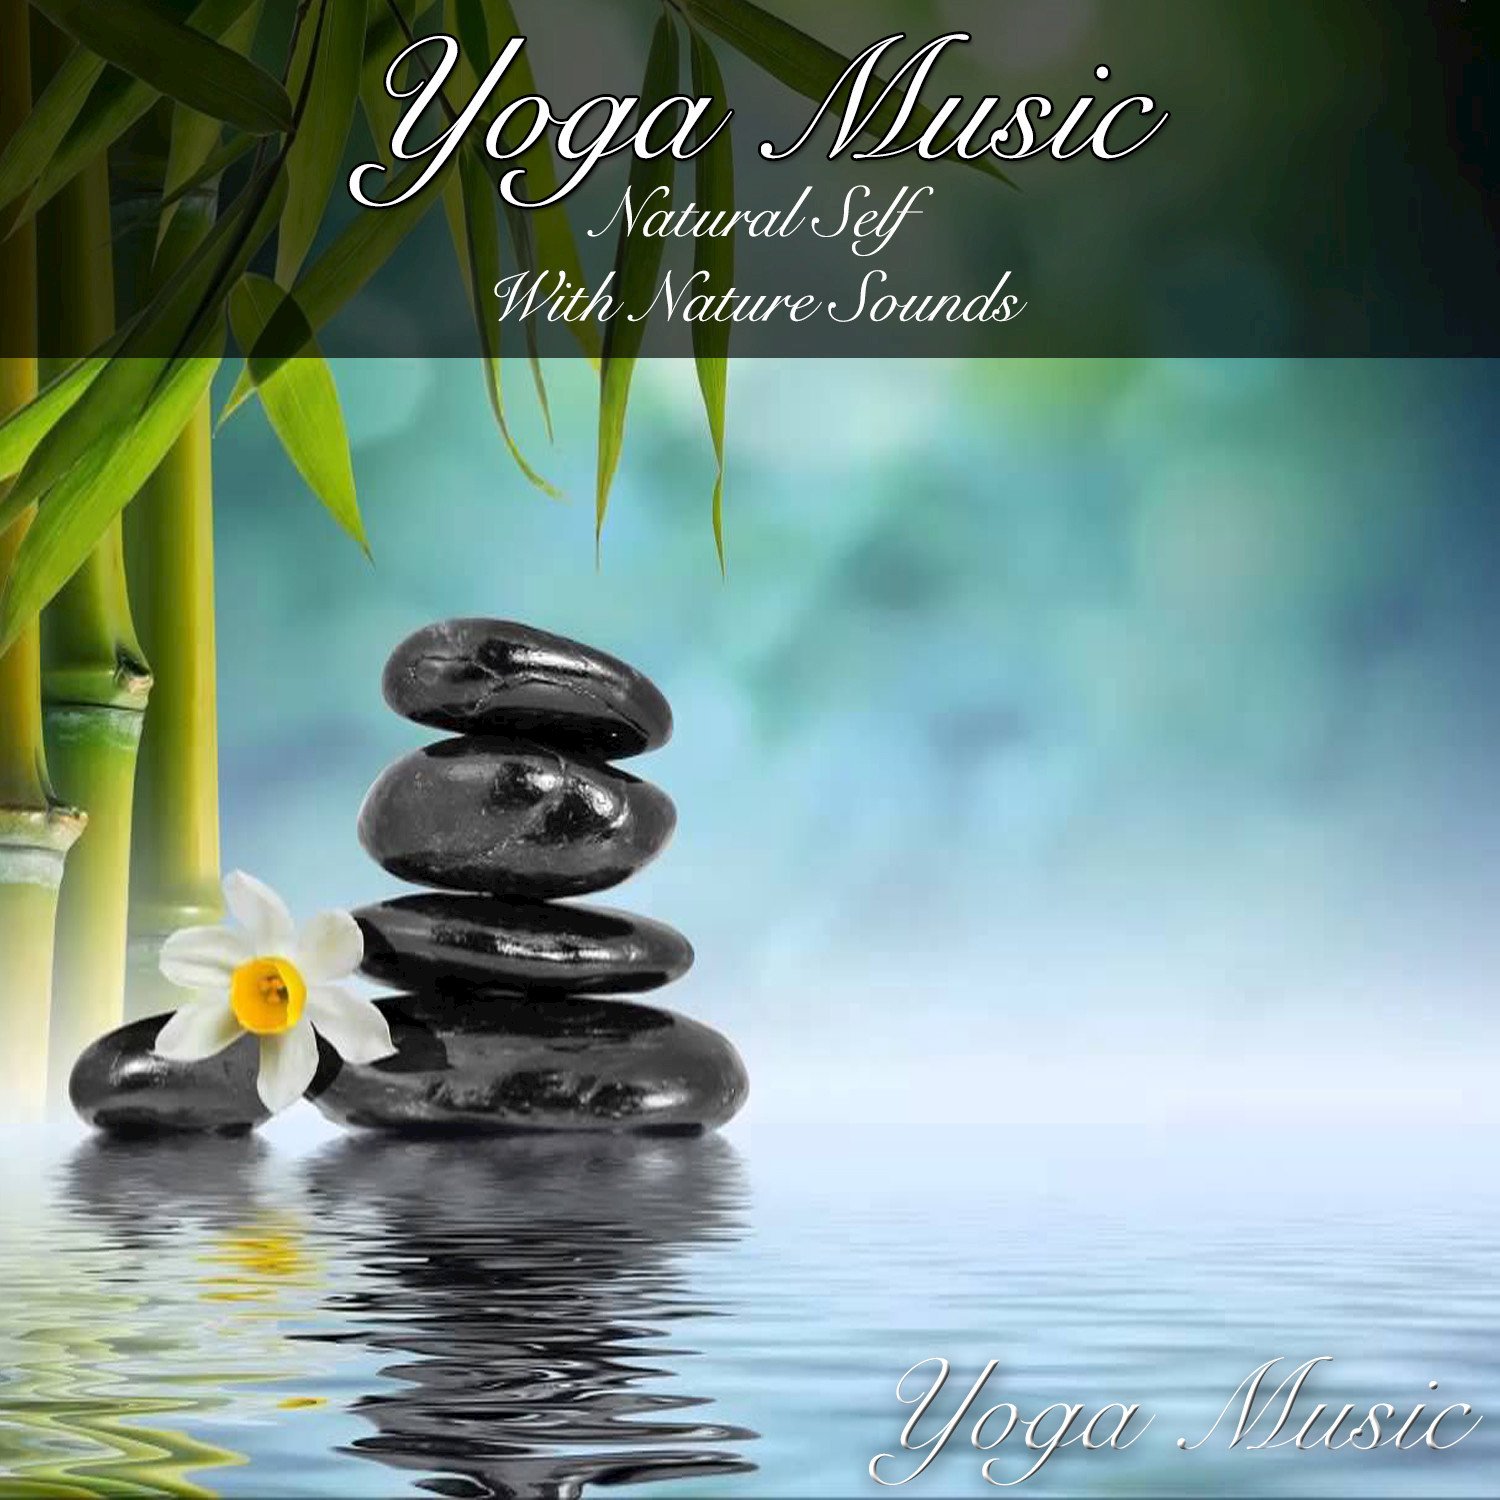 Yoga Music: Natural Self with Nature Sounds